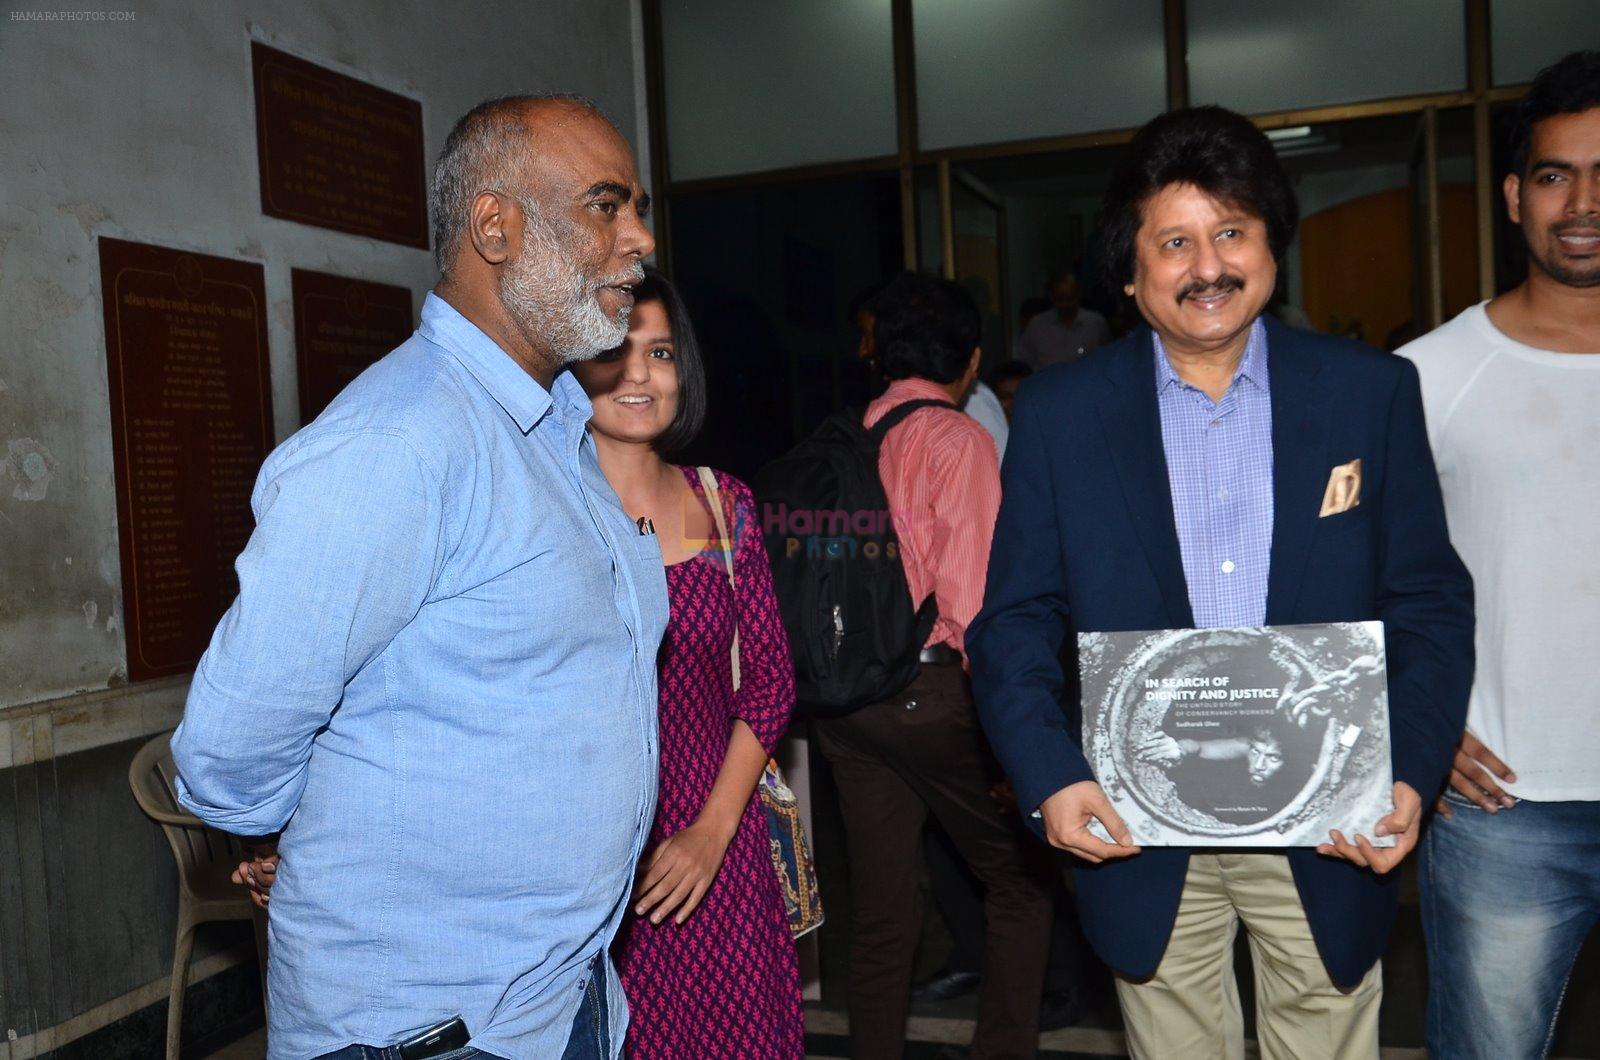 Pankaj Udhas at the launch of book In Search of Dignity and Justice by Sudharak Olwe in Mumbai on 22nd Jan 2015